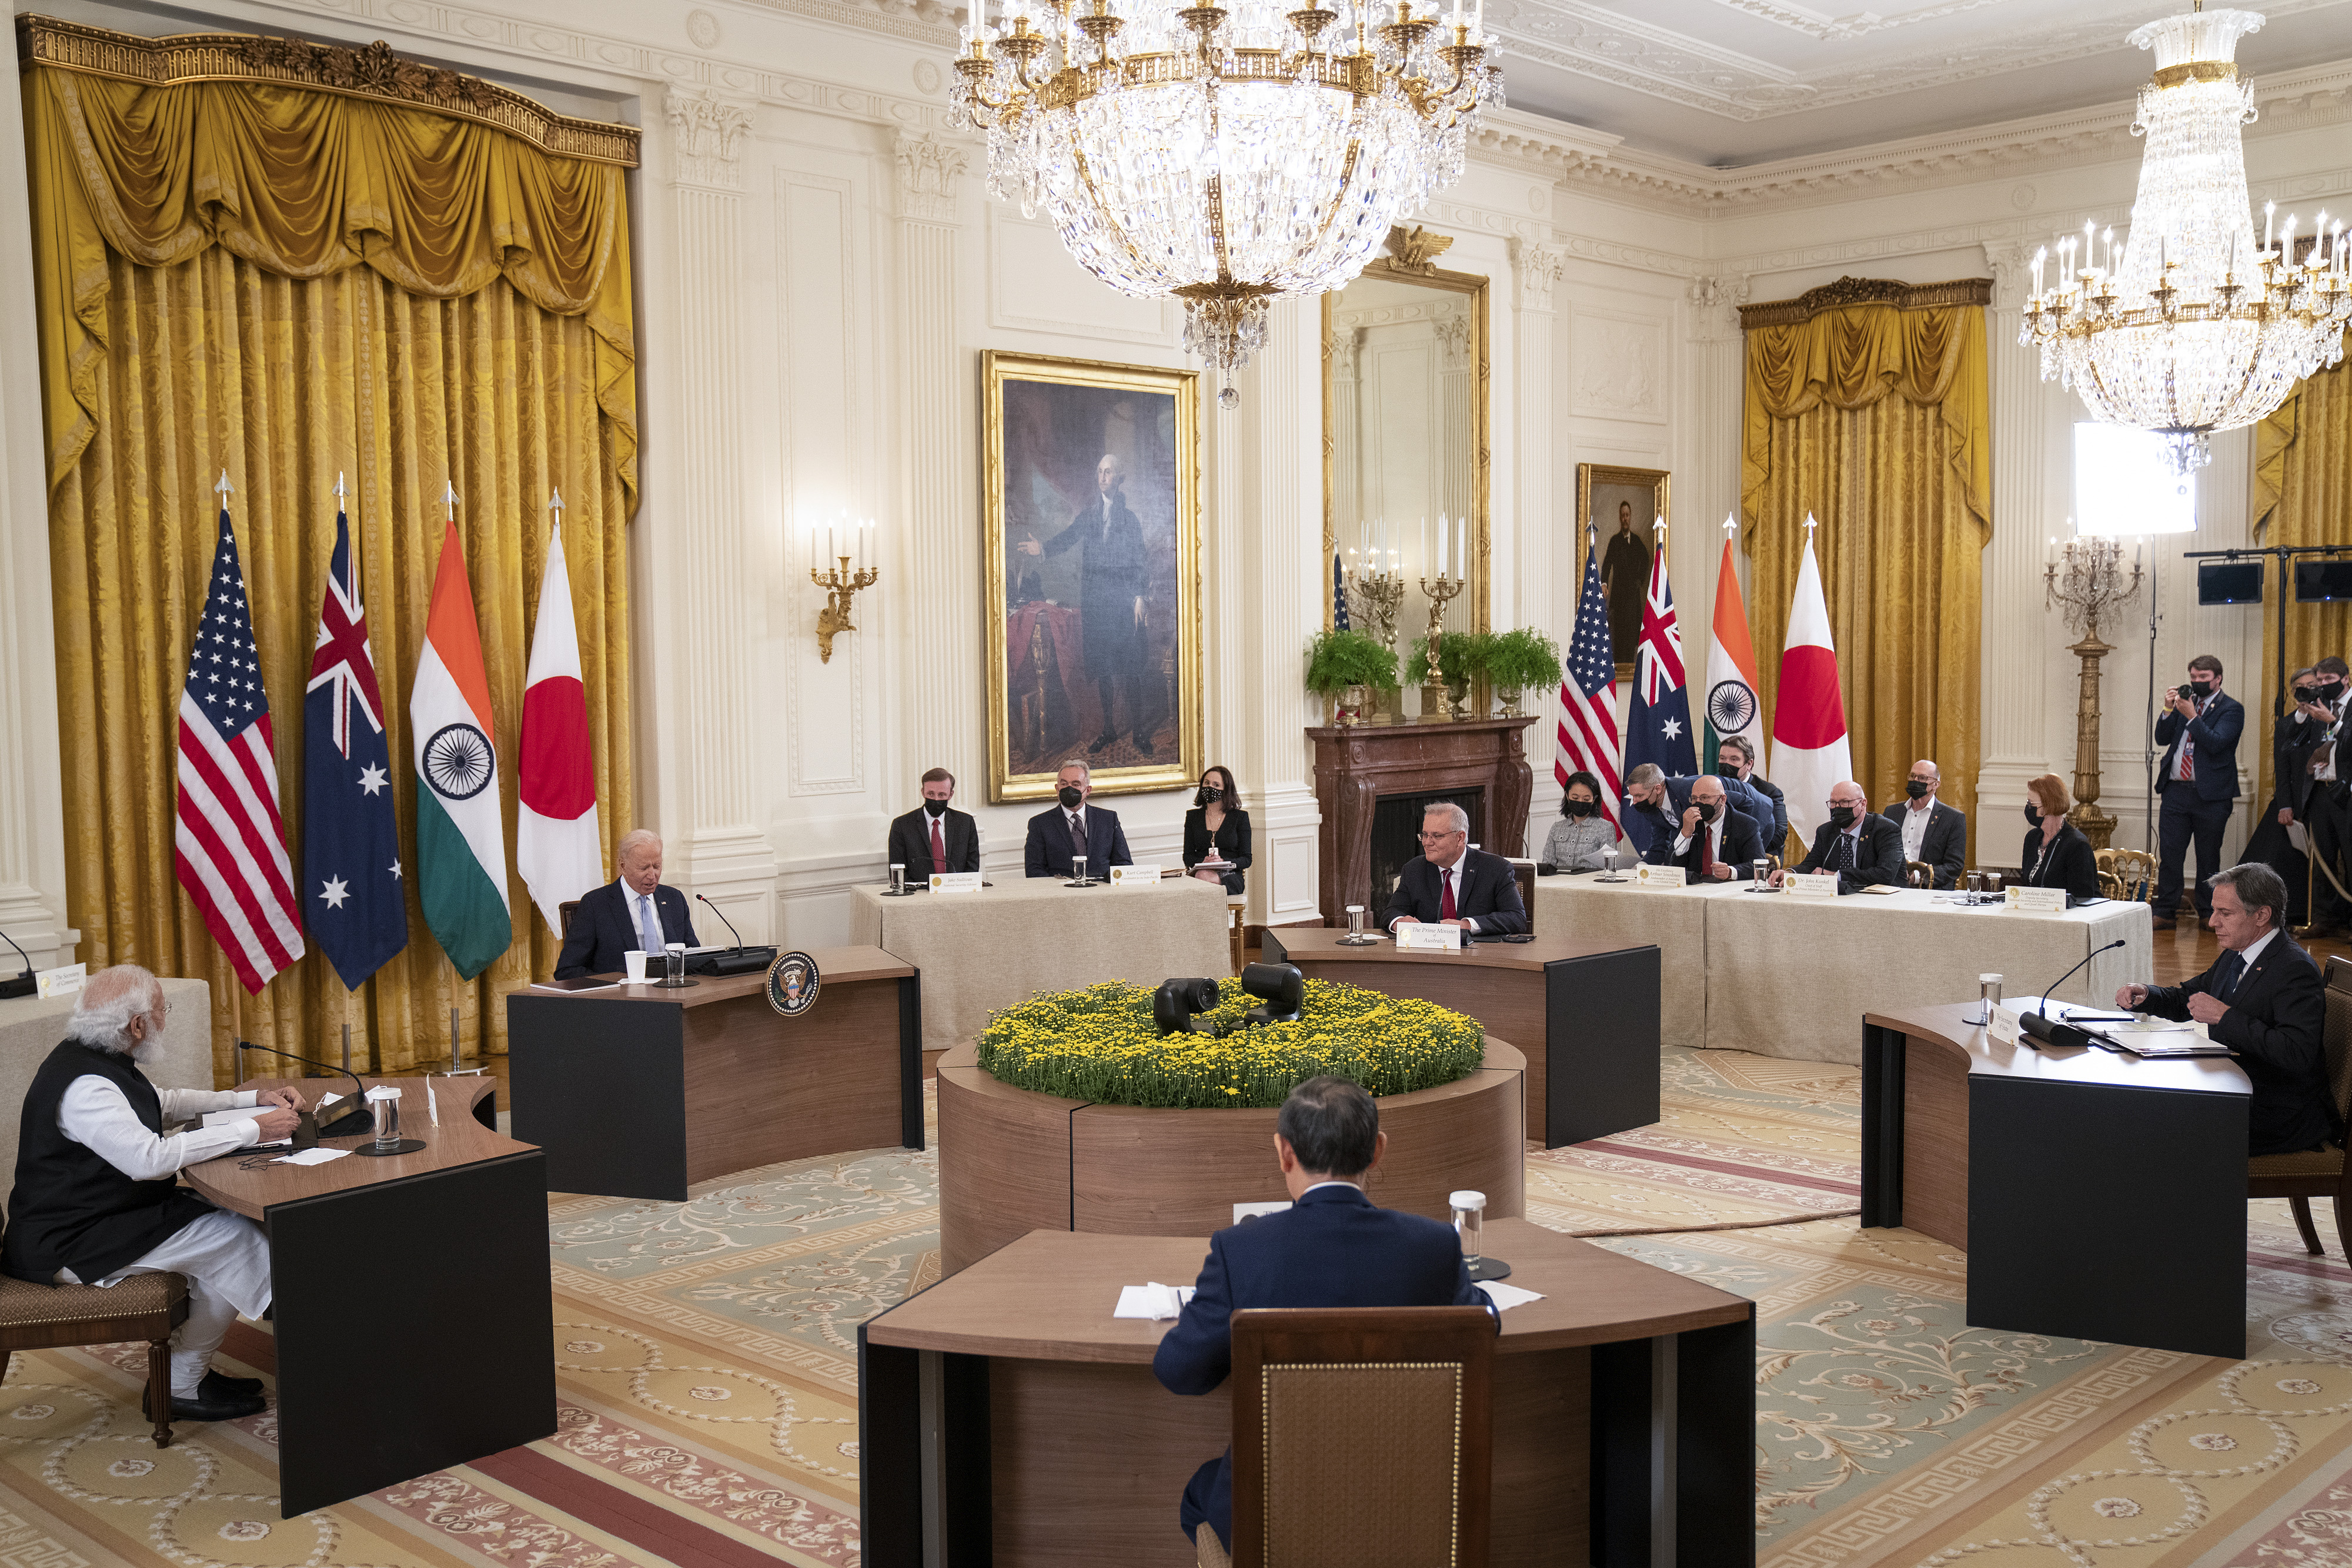 Joe Biden (C-L) hosts a Quad Leaders Summit along with Indian Prime Minister Narendra Modi, Australian Prime Minister Scott Morrison and Japanese Prime Minister Suga Yoshihide in the East Room of the White House on September 24, 2021 in Washington, DC. The four leaders are expected to discuss a range of topics including climate change, Covid-19 vaccines and a free and open Indo-Pacific ocean region. (Photo by Pool/Getty Images)